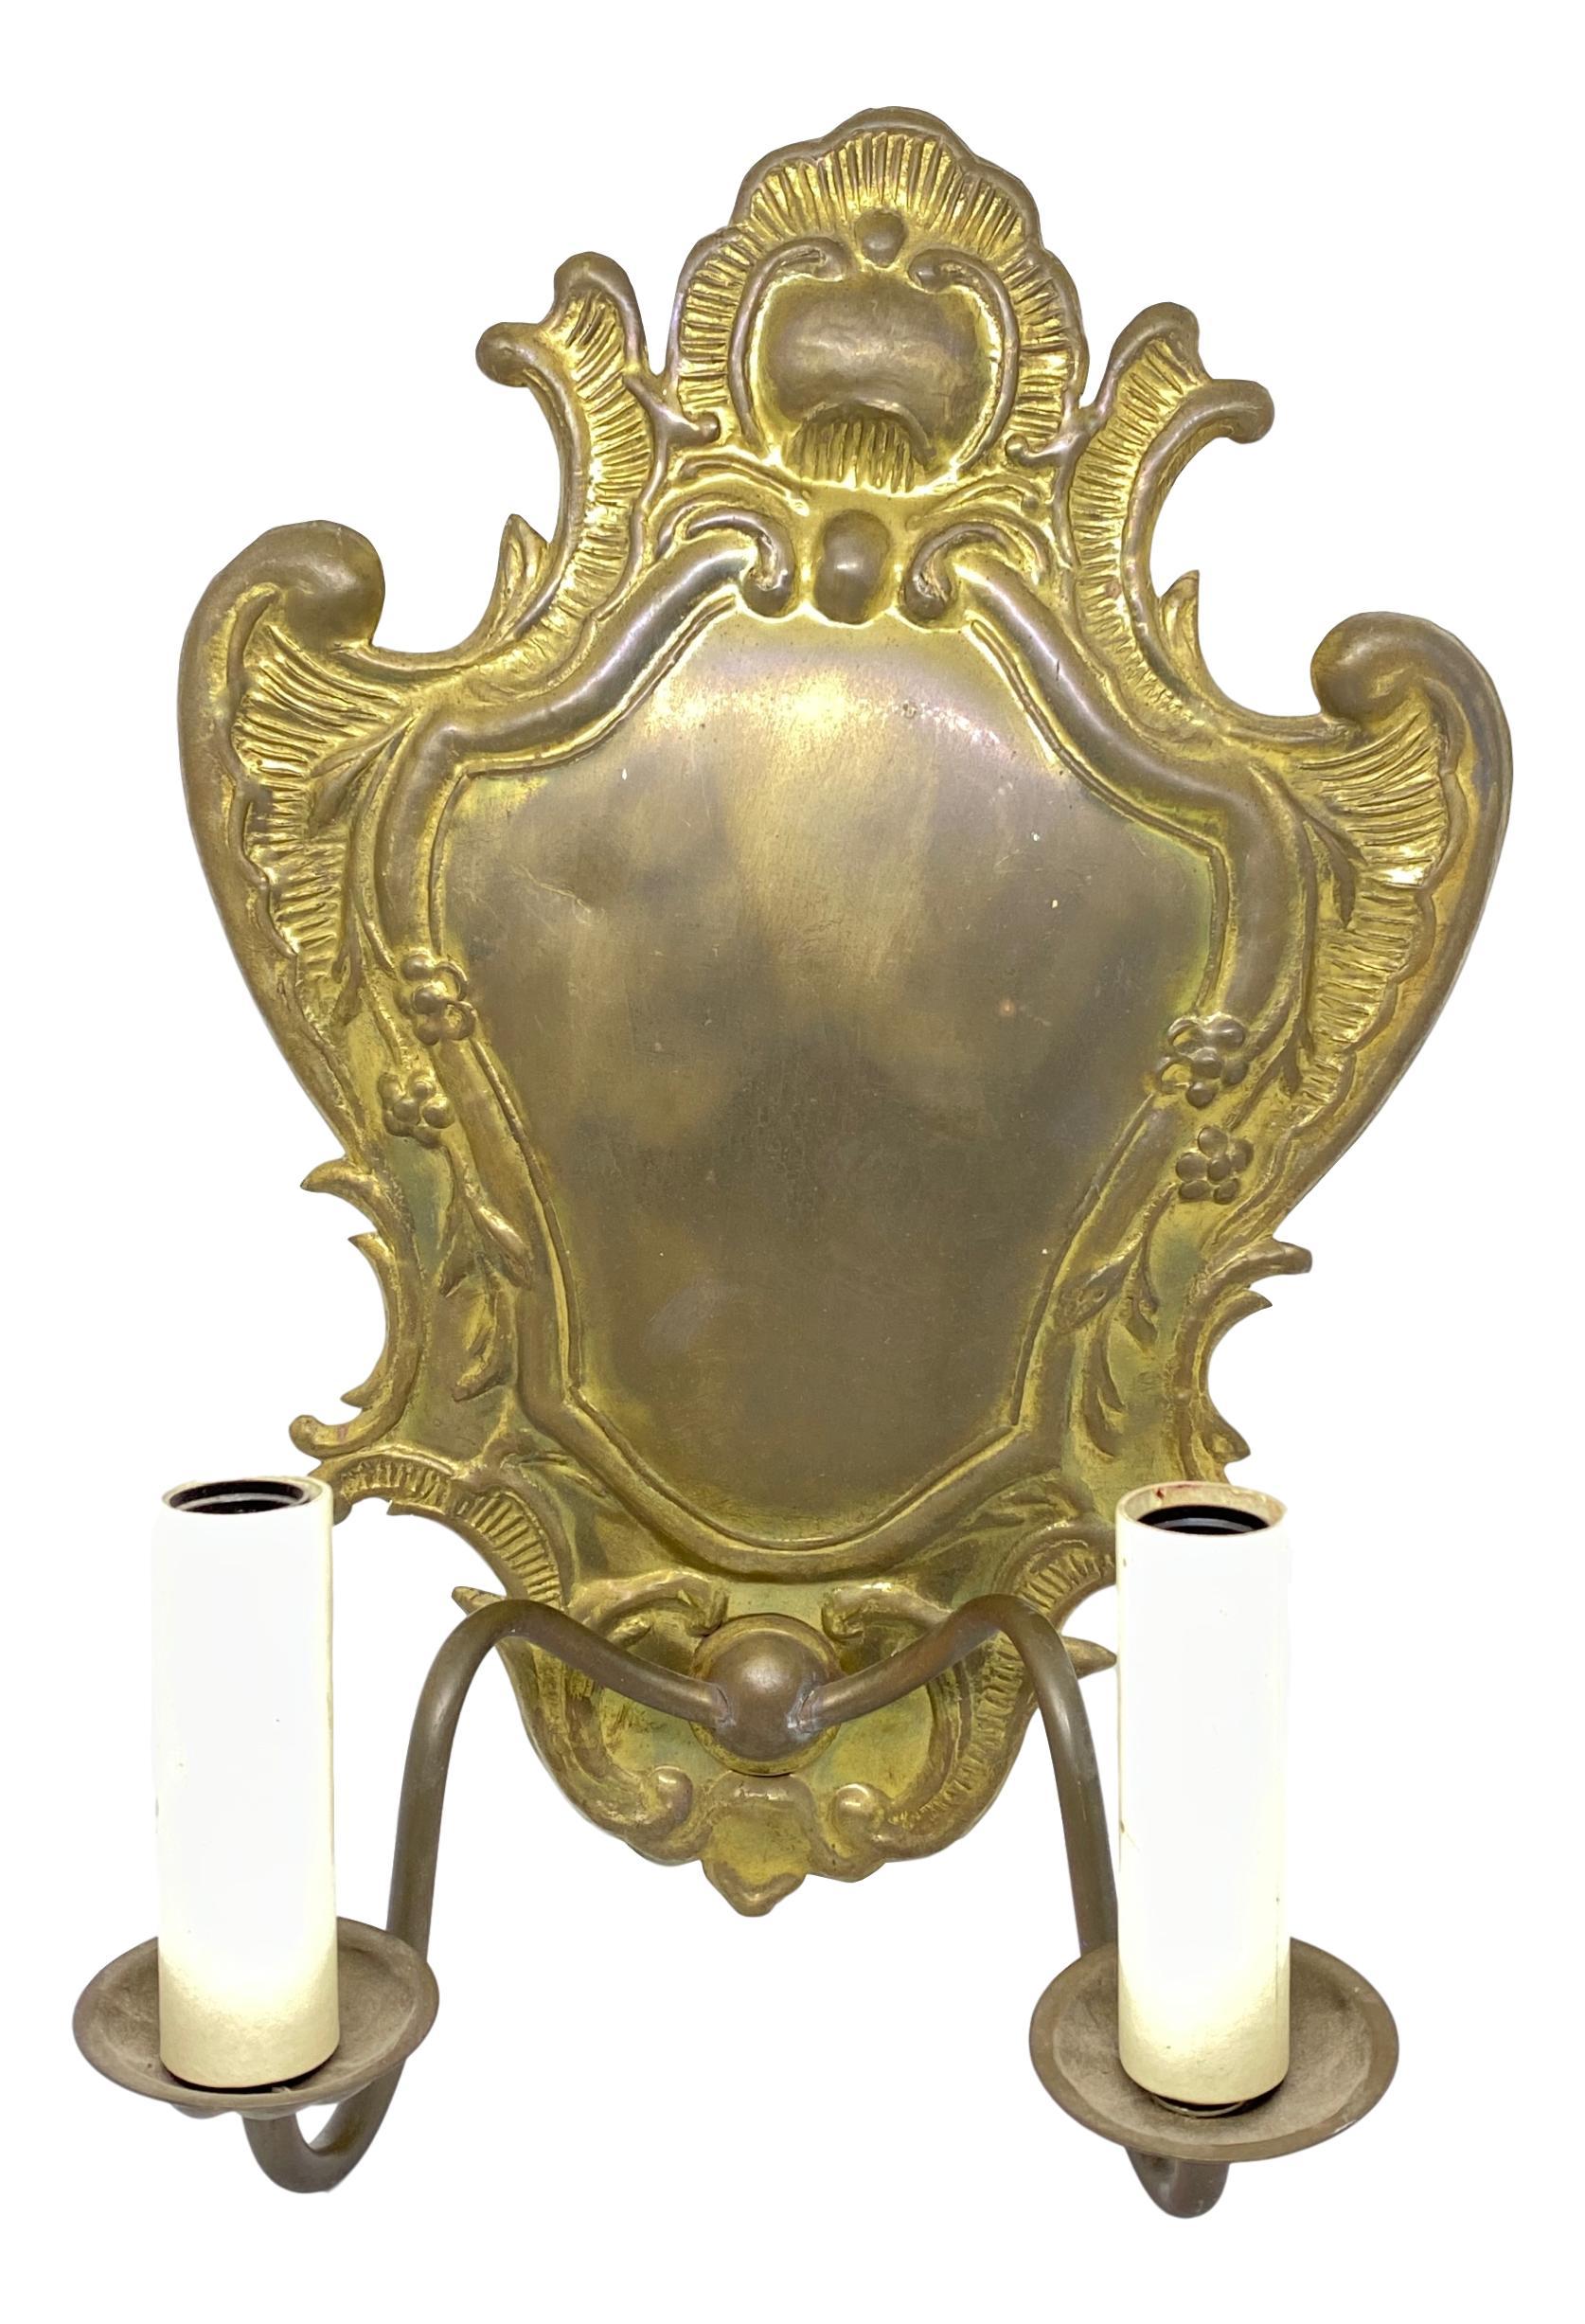 Pair of beautiful sconces. Made of brass in Germany in the 1960s. Great size and stunning design. Brings a touch of elegance to the room. Each fixture requires two European E14 / 110 volt candelabra bulbs, up to 40 watts each socket. The brass has a